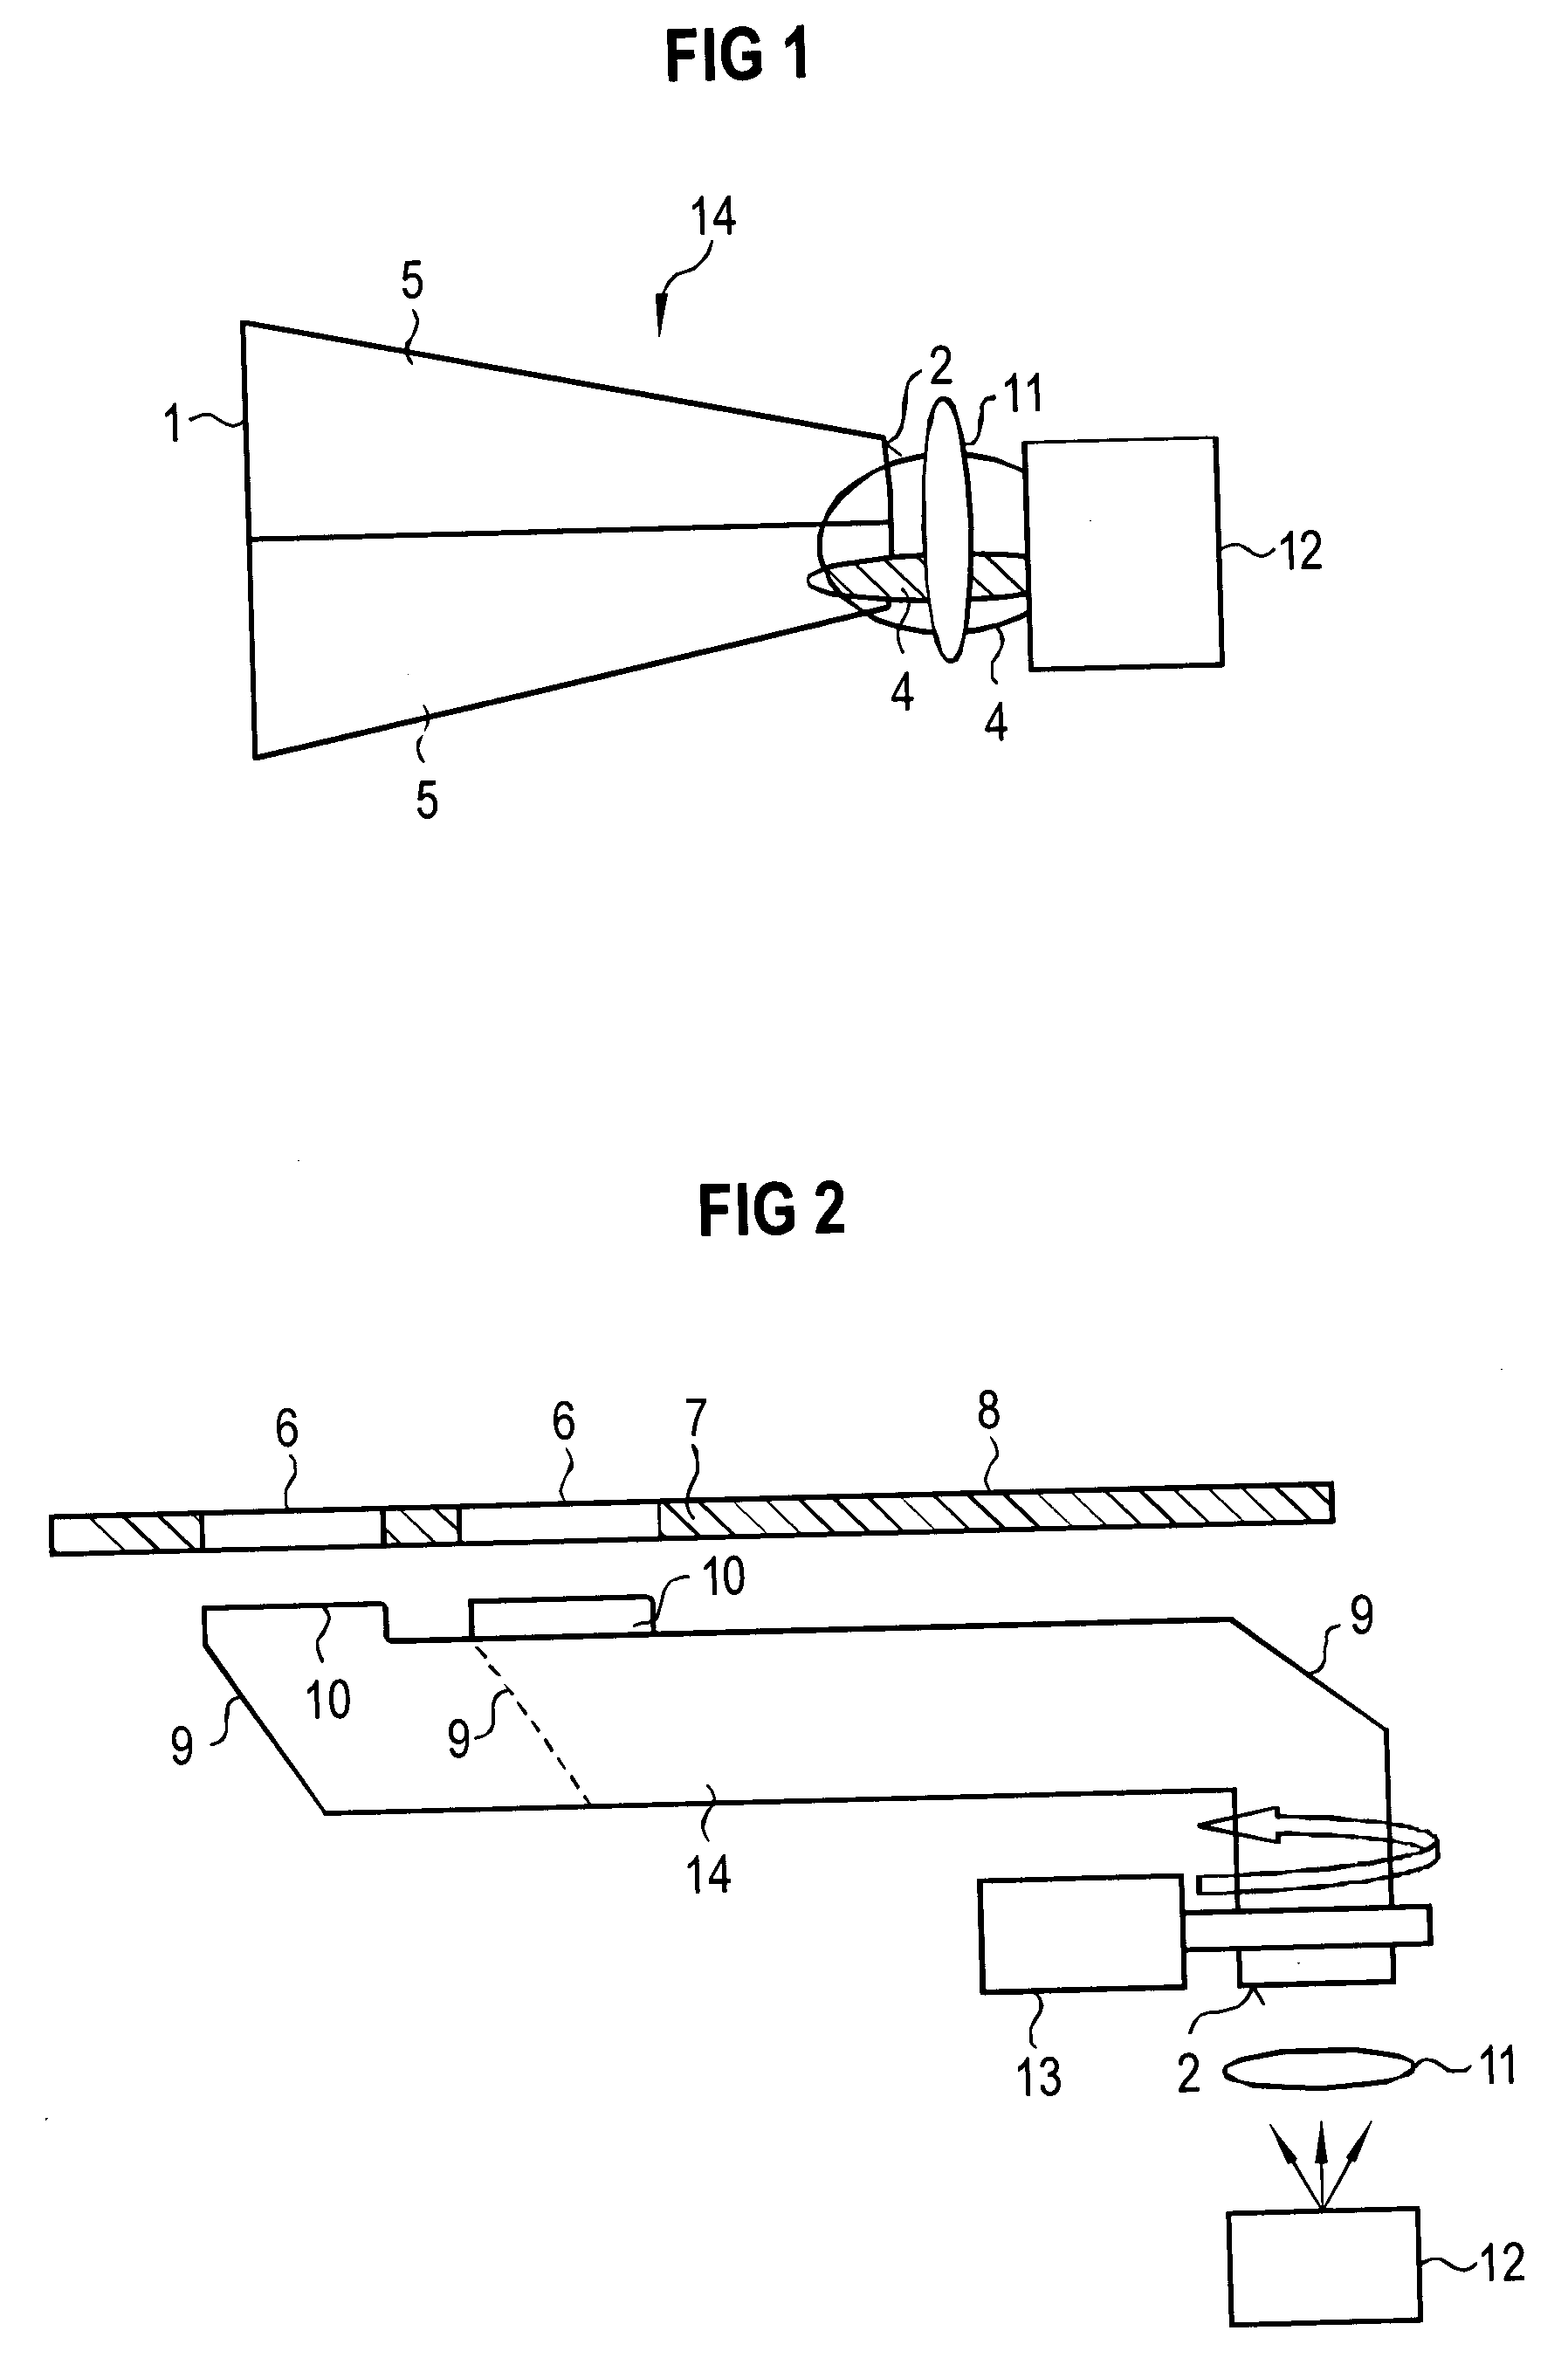 Display device comprising a luminous element with an emission characteristic of controllable solid angle